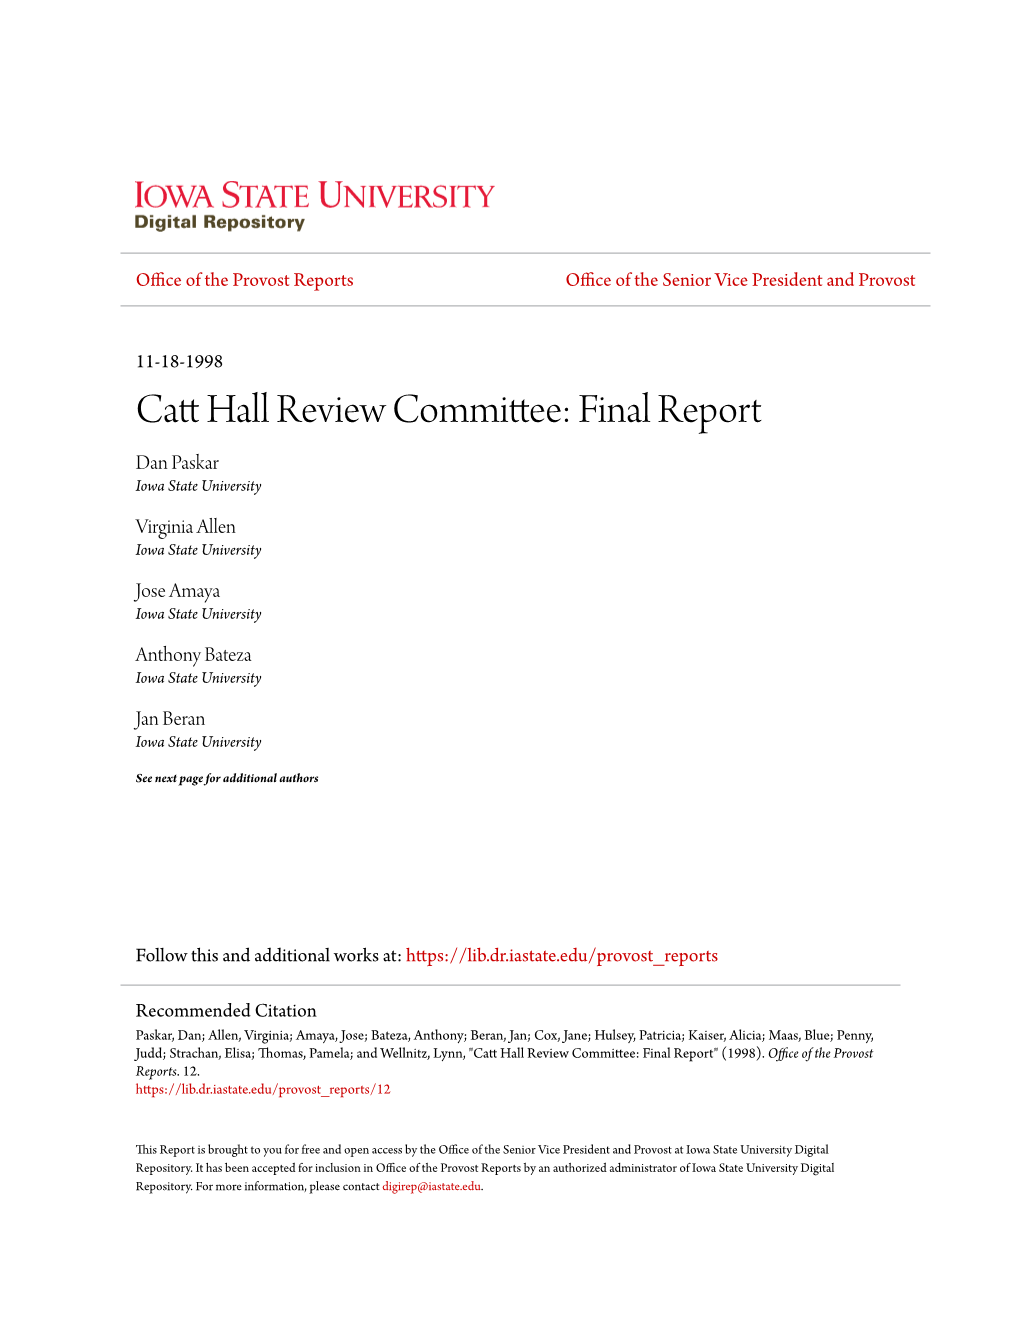 Catt Hall Review Committee: Final Report